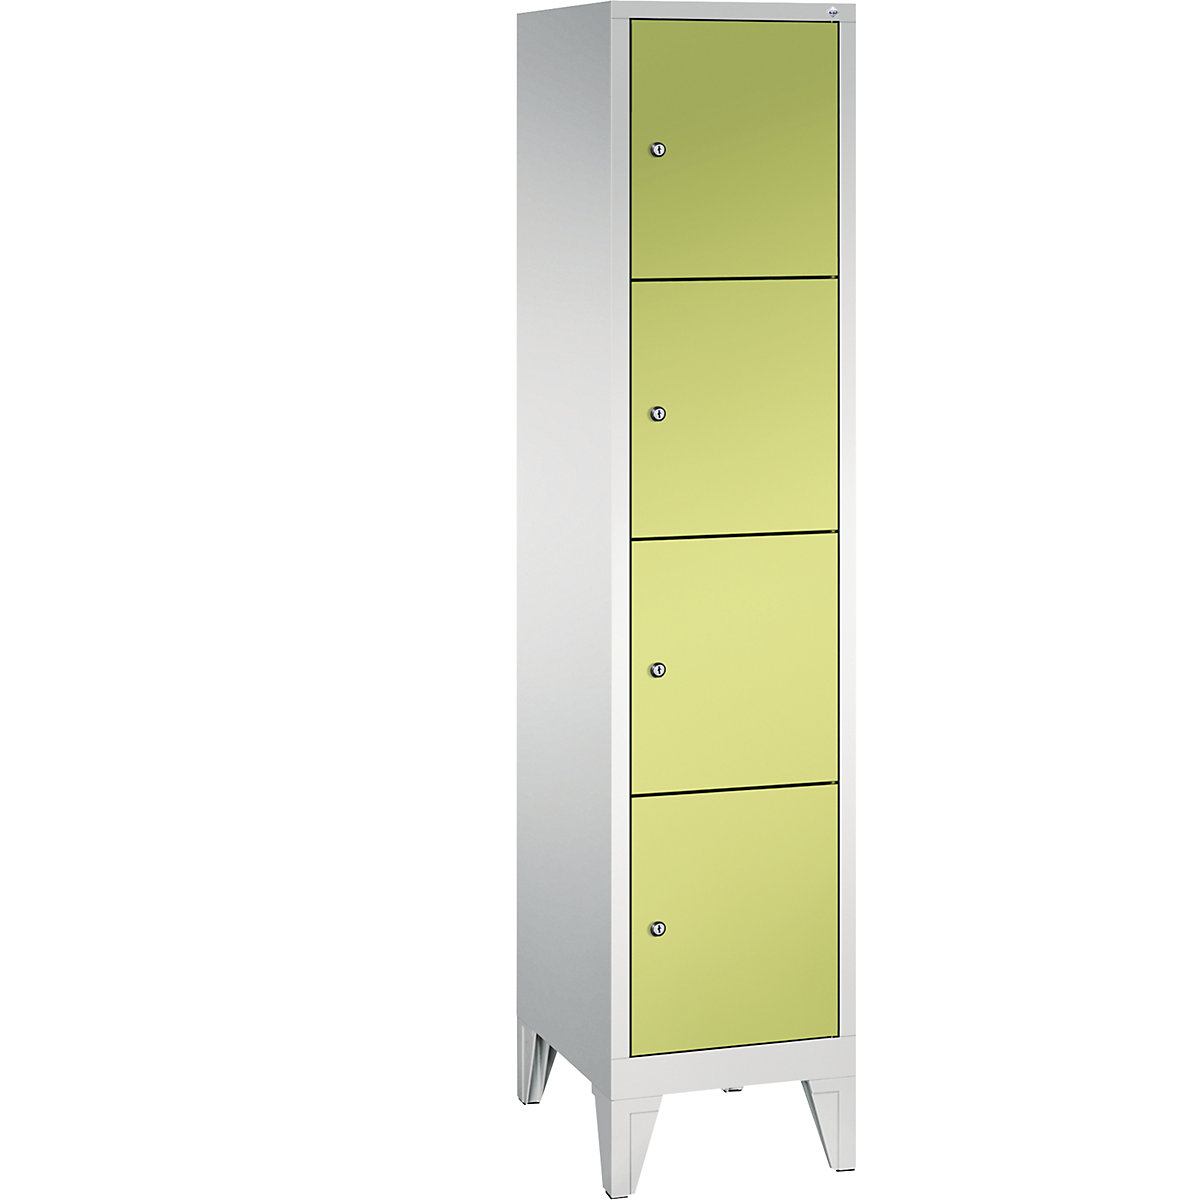 CLASSIC locker unit with feet – C+P, 1 compartment, 4 shelf compartments, compartment width 400 mm, light grey / viridian green-3